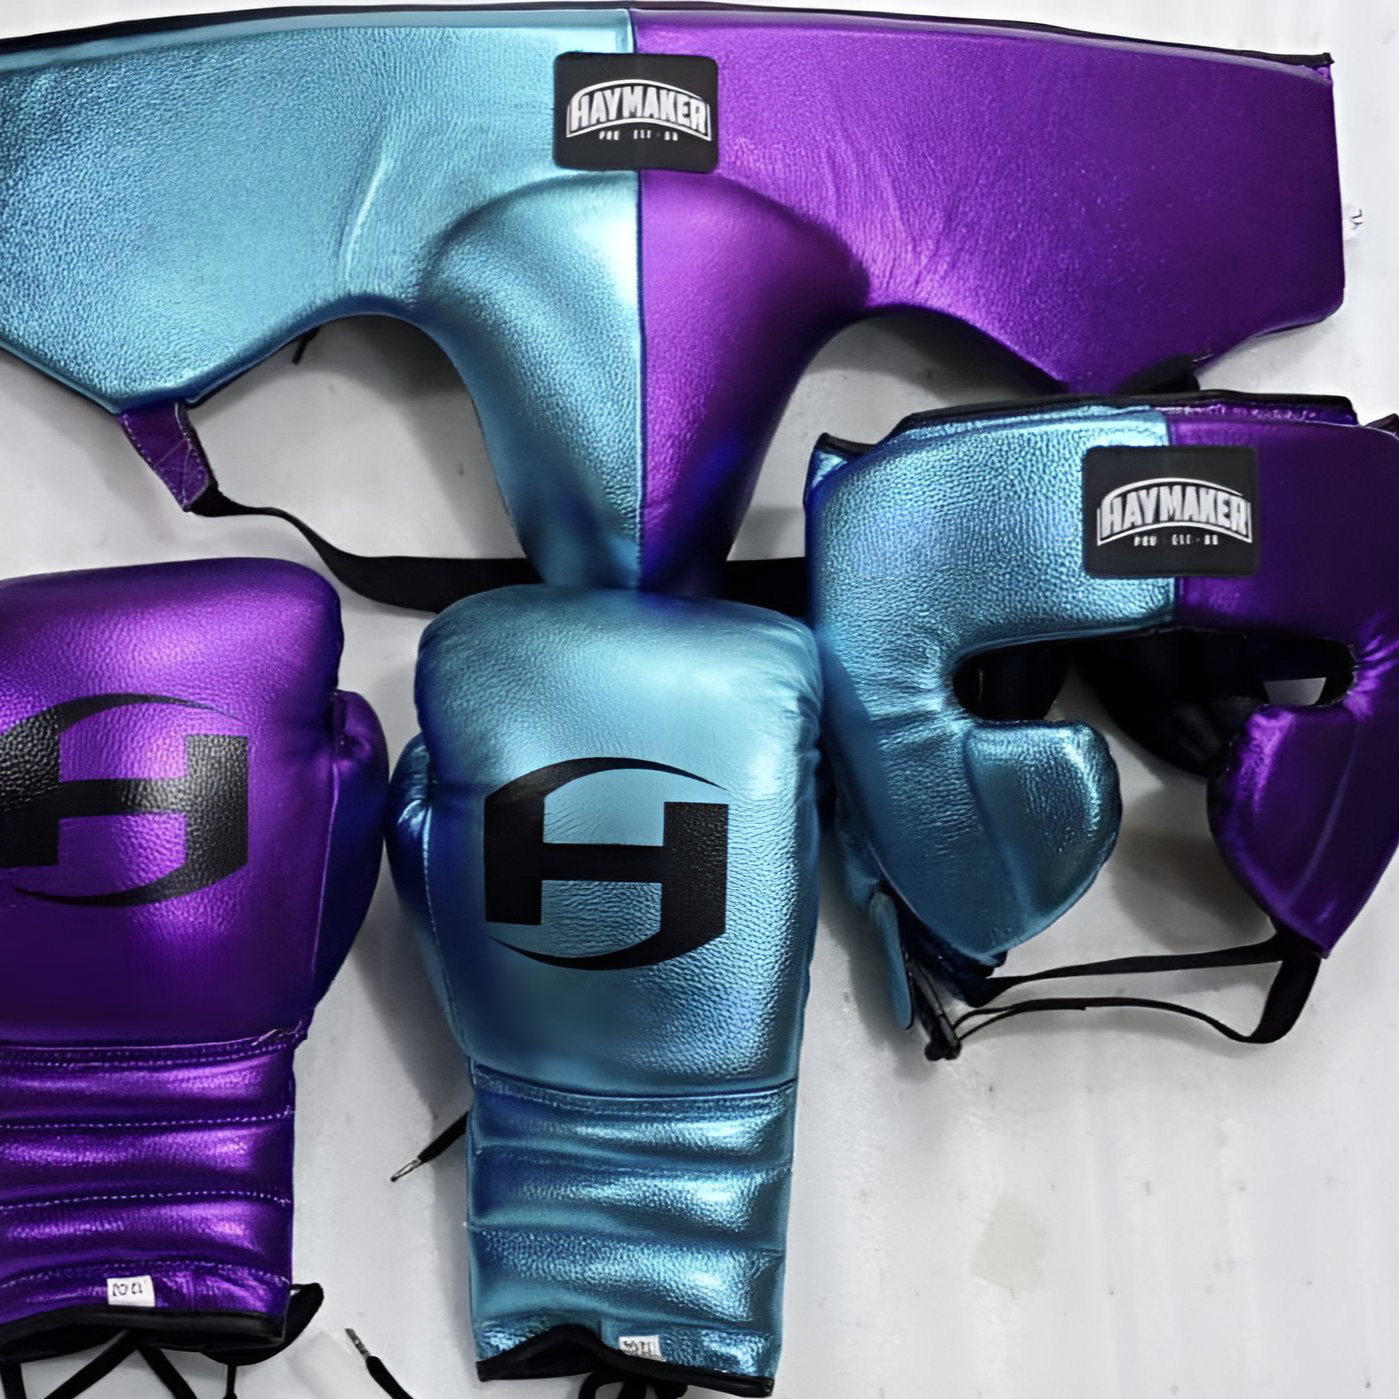 EDITION METALLIC BOXING | | 100% PRO SET LEATHER SPARRING – HAYMAKER |